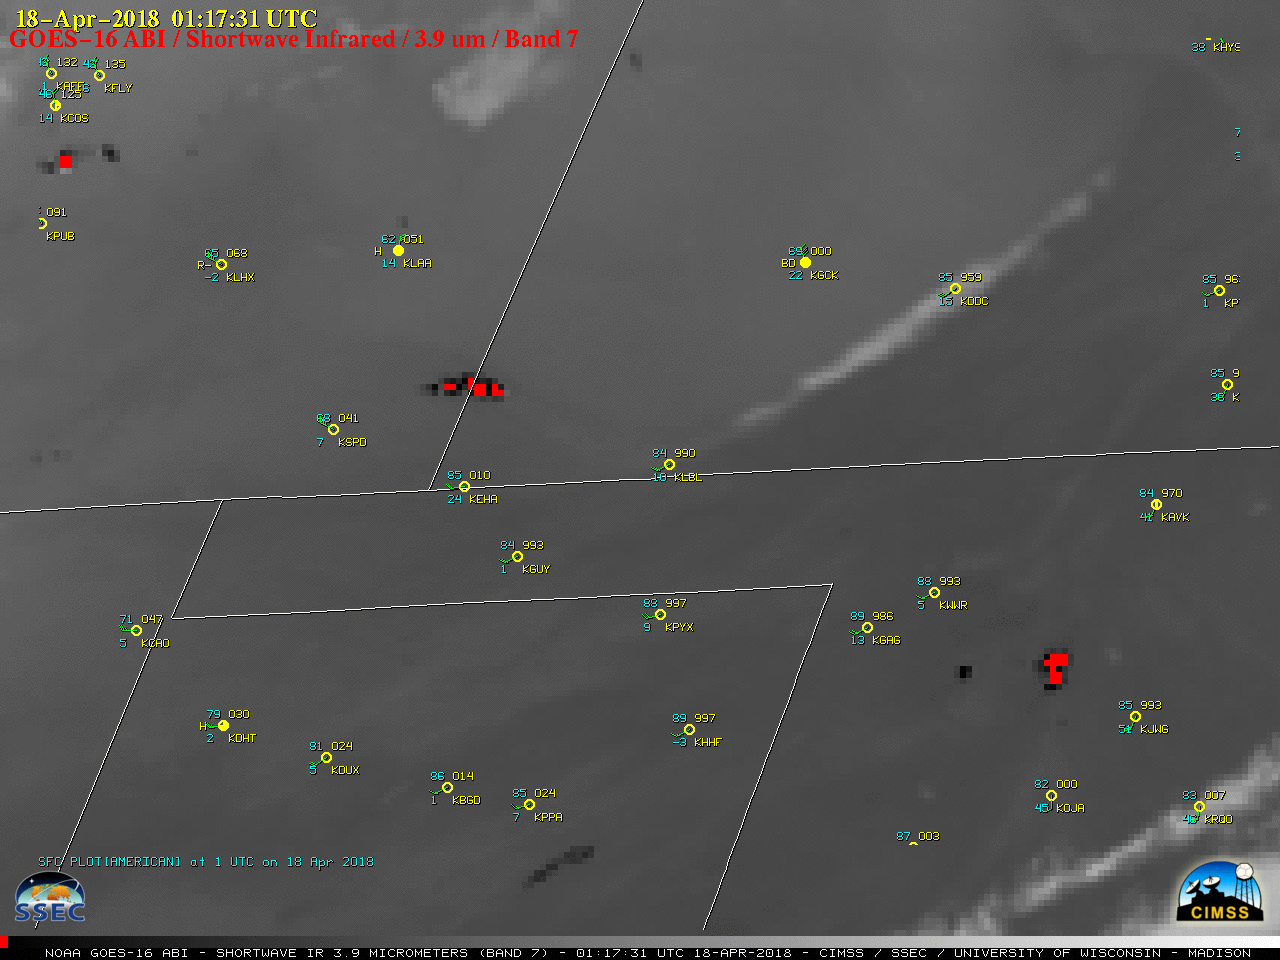 GOES-16 Shortwave Infrared (3.9 µm) images, with hourly plots of surface reports [click to play MP4 animation]